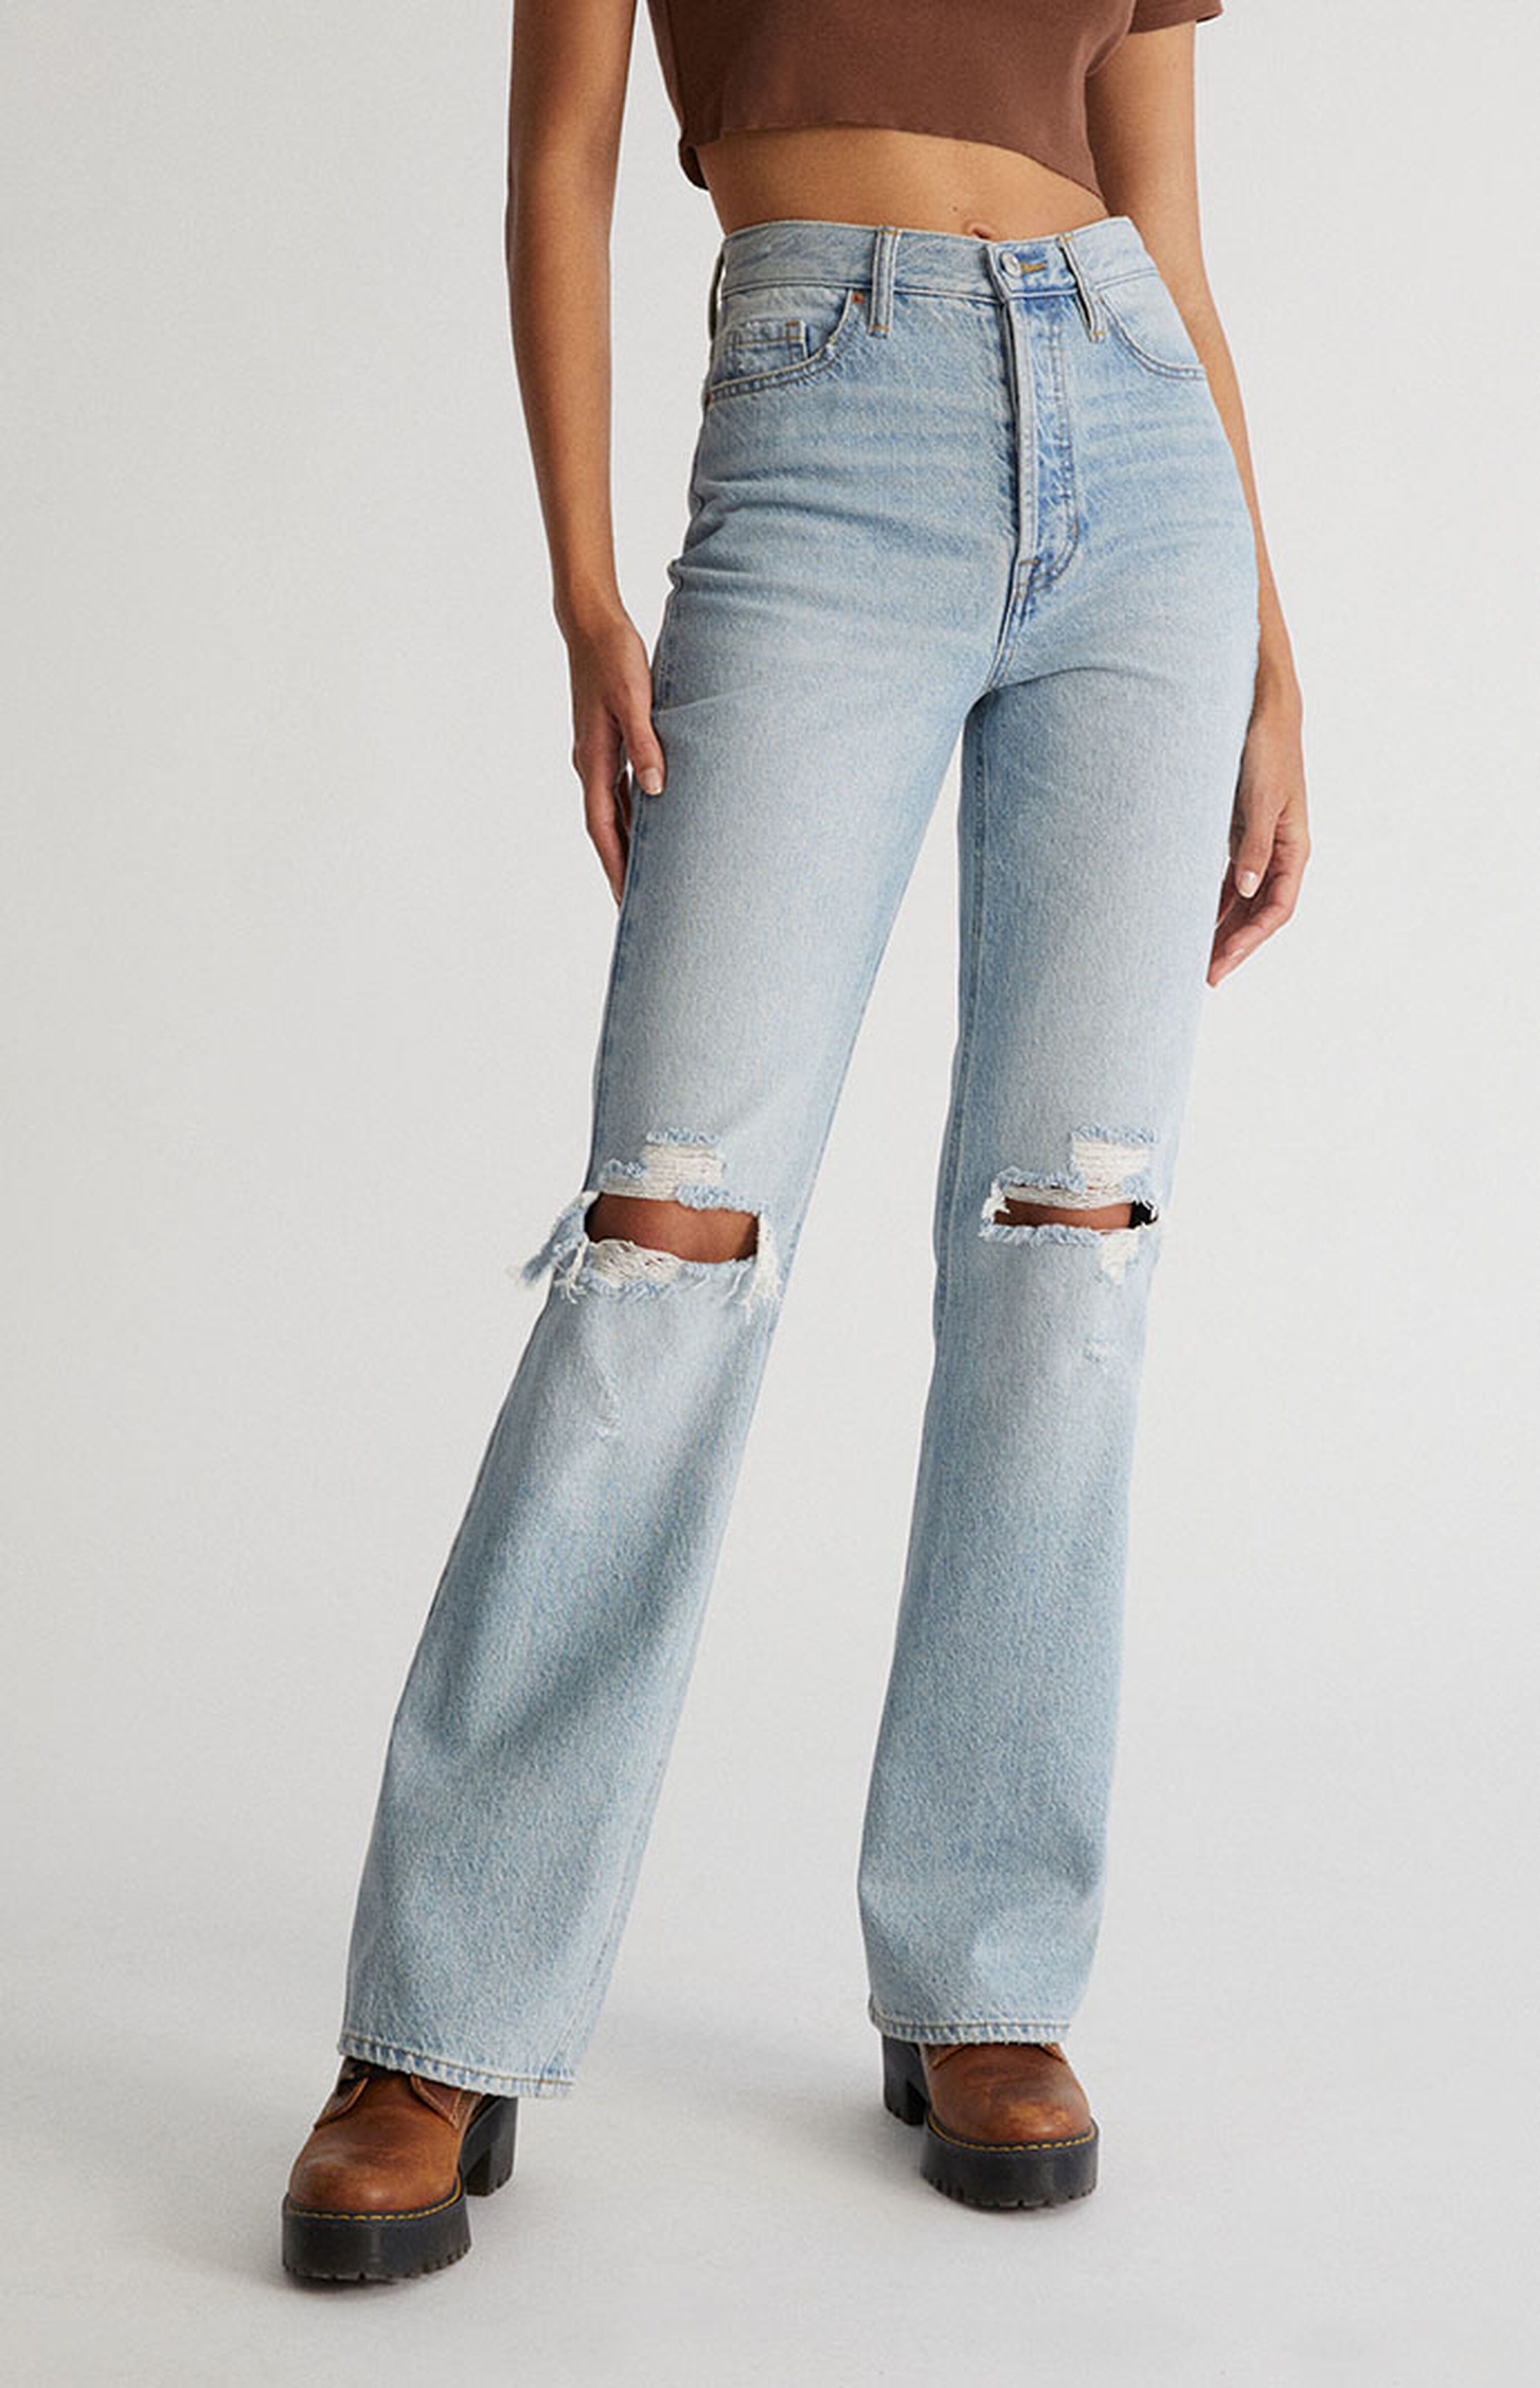 PacSun Eco Light Blue Ripped High Waisted Bootcut Jeans | PacSun | PacSun